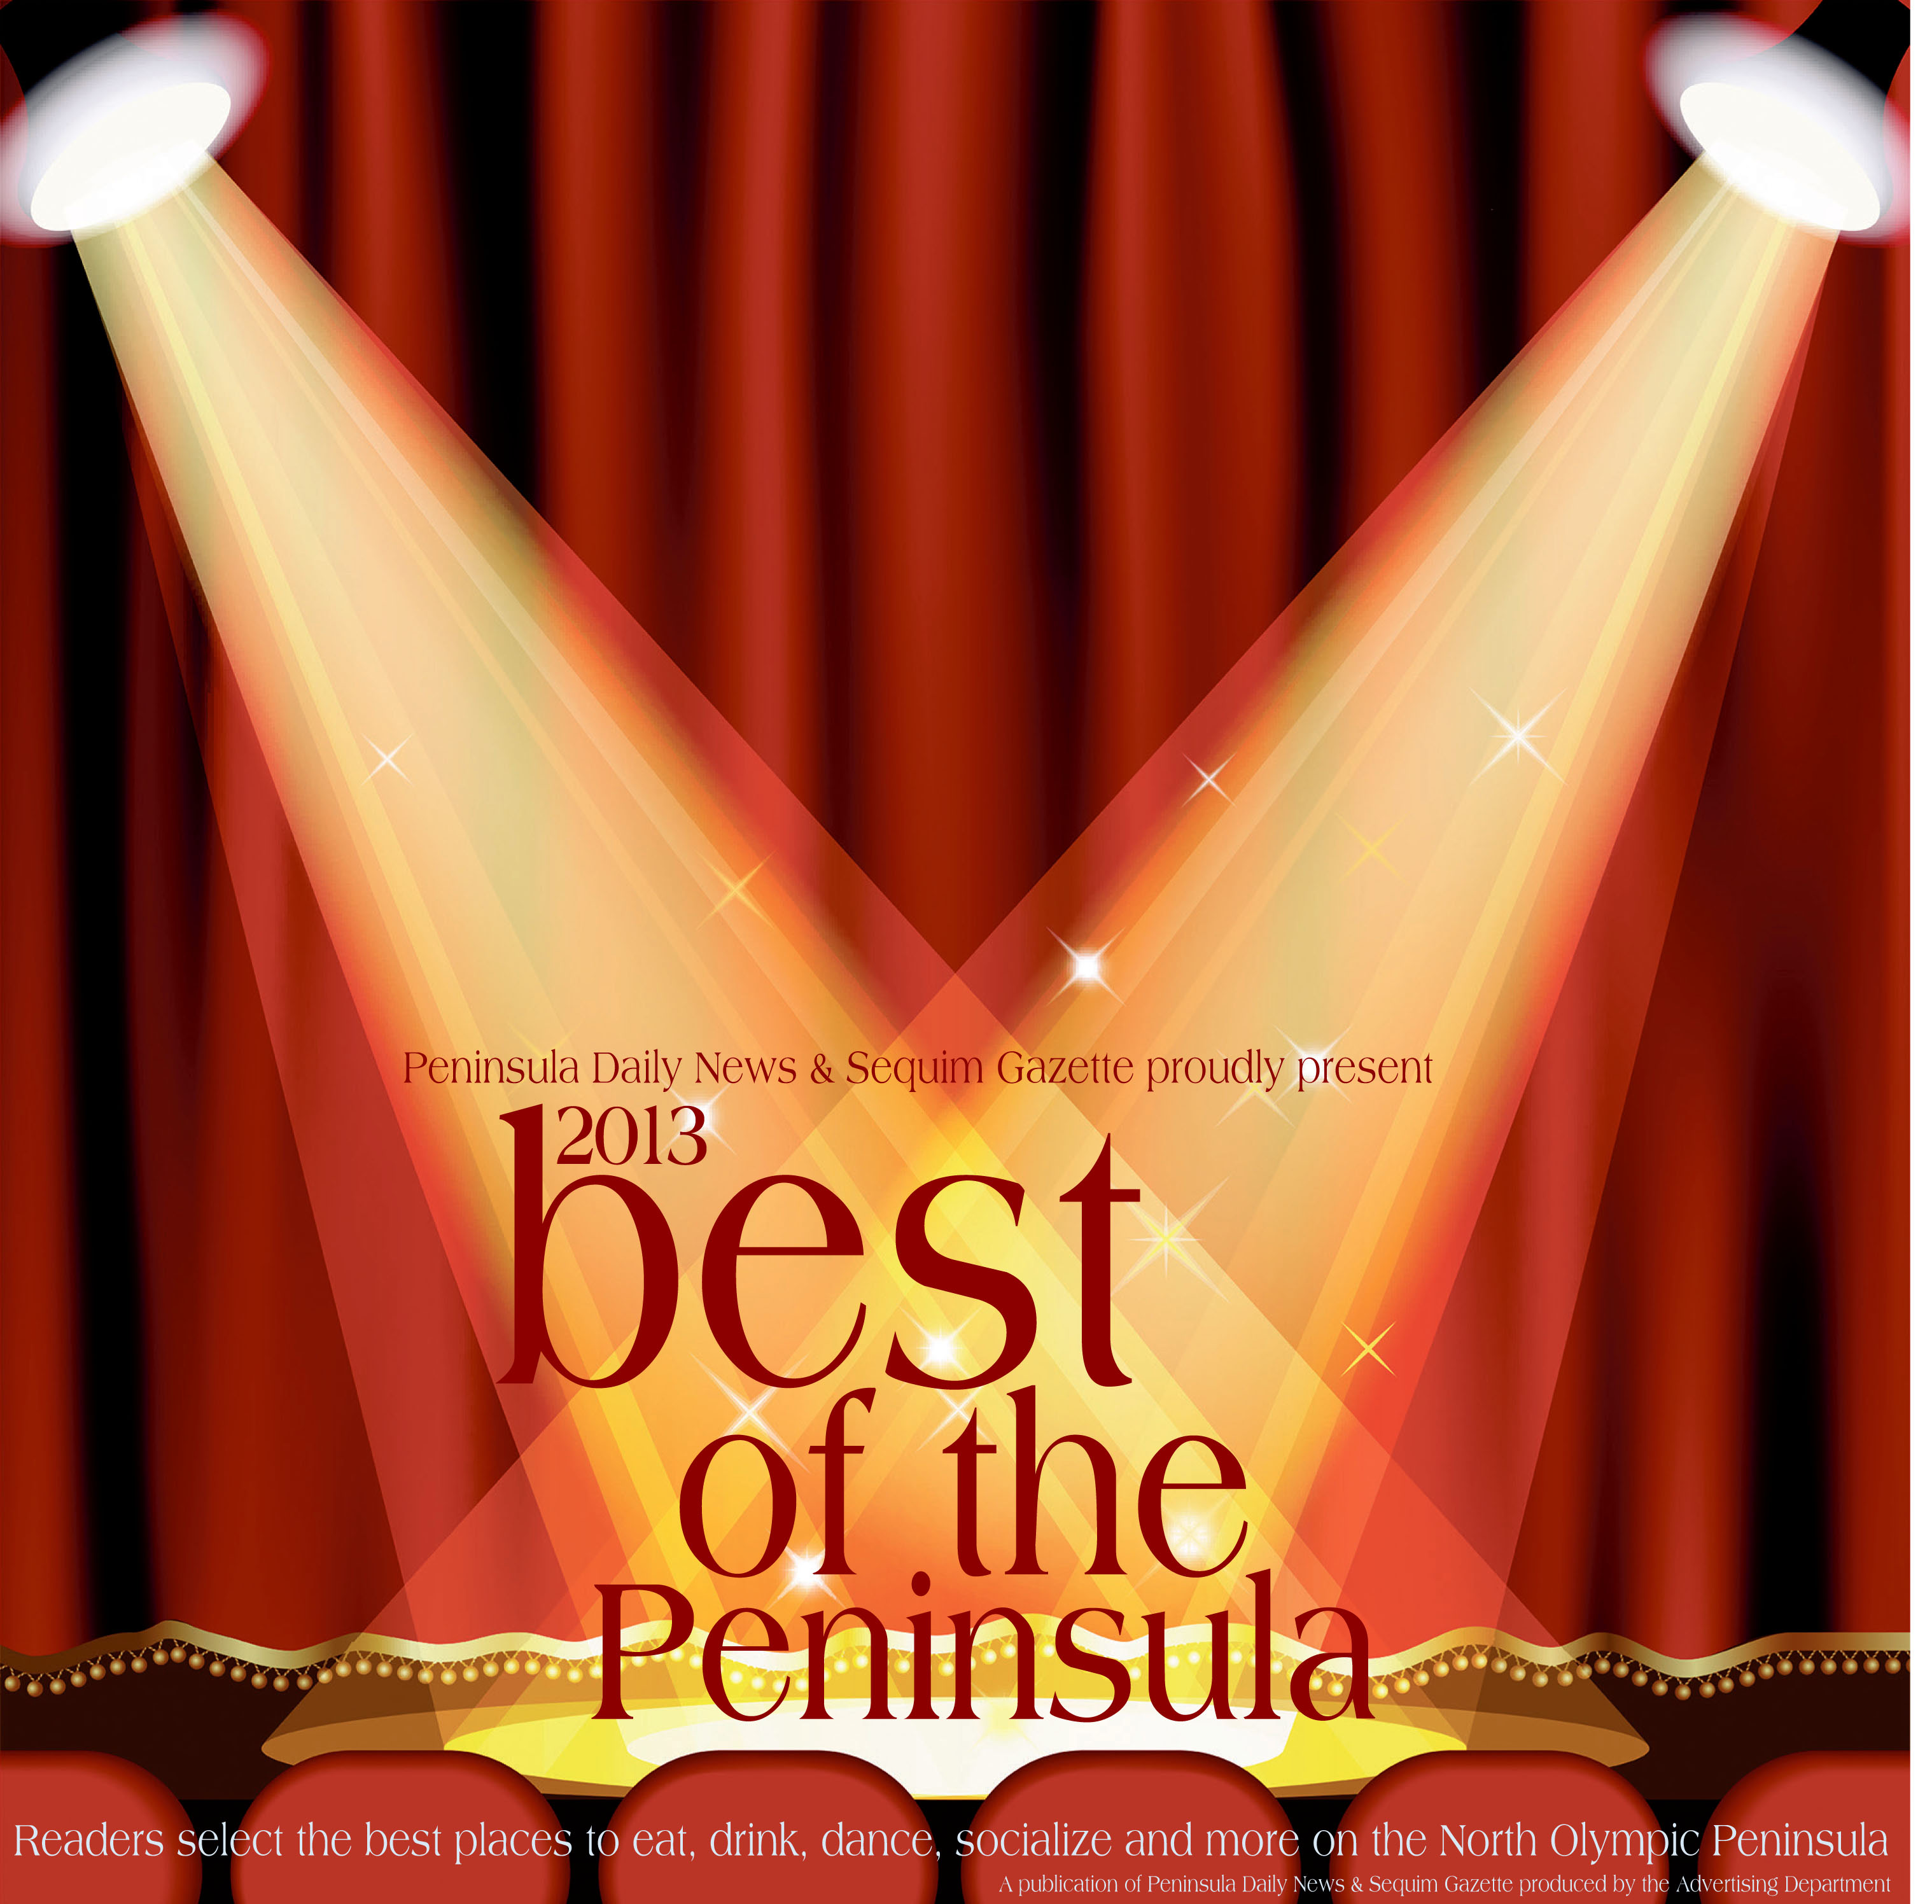 Revealed today: The 2013 Best of the Peninsula!